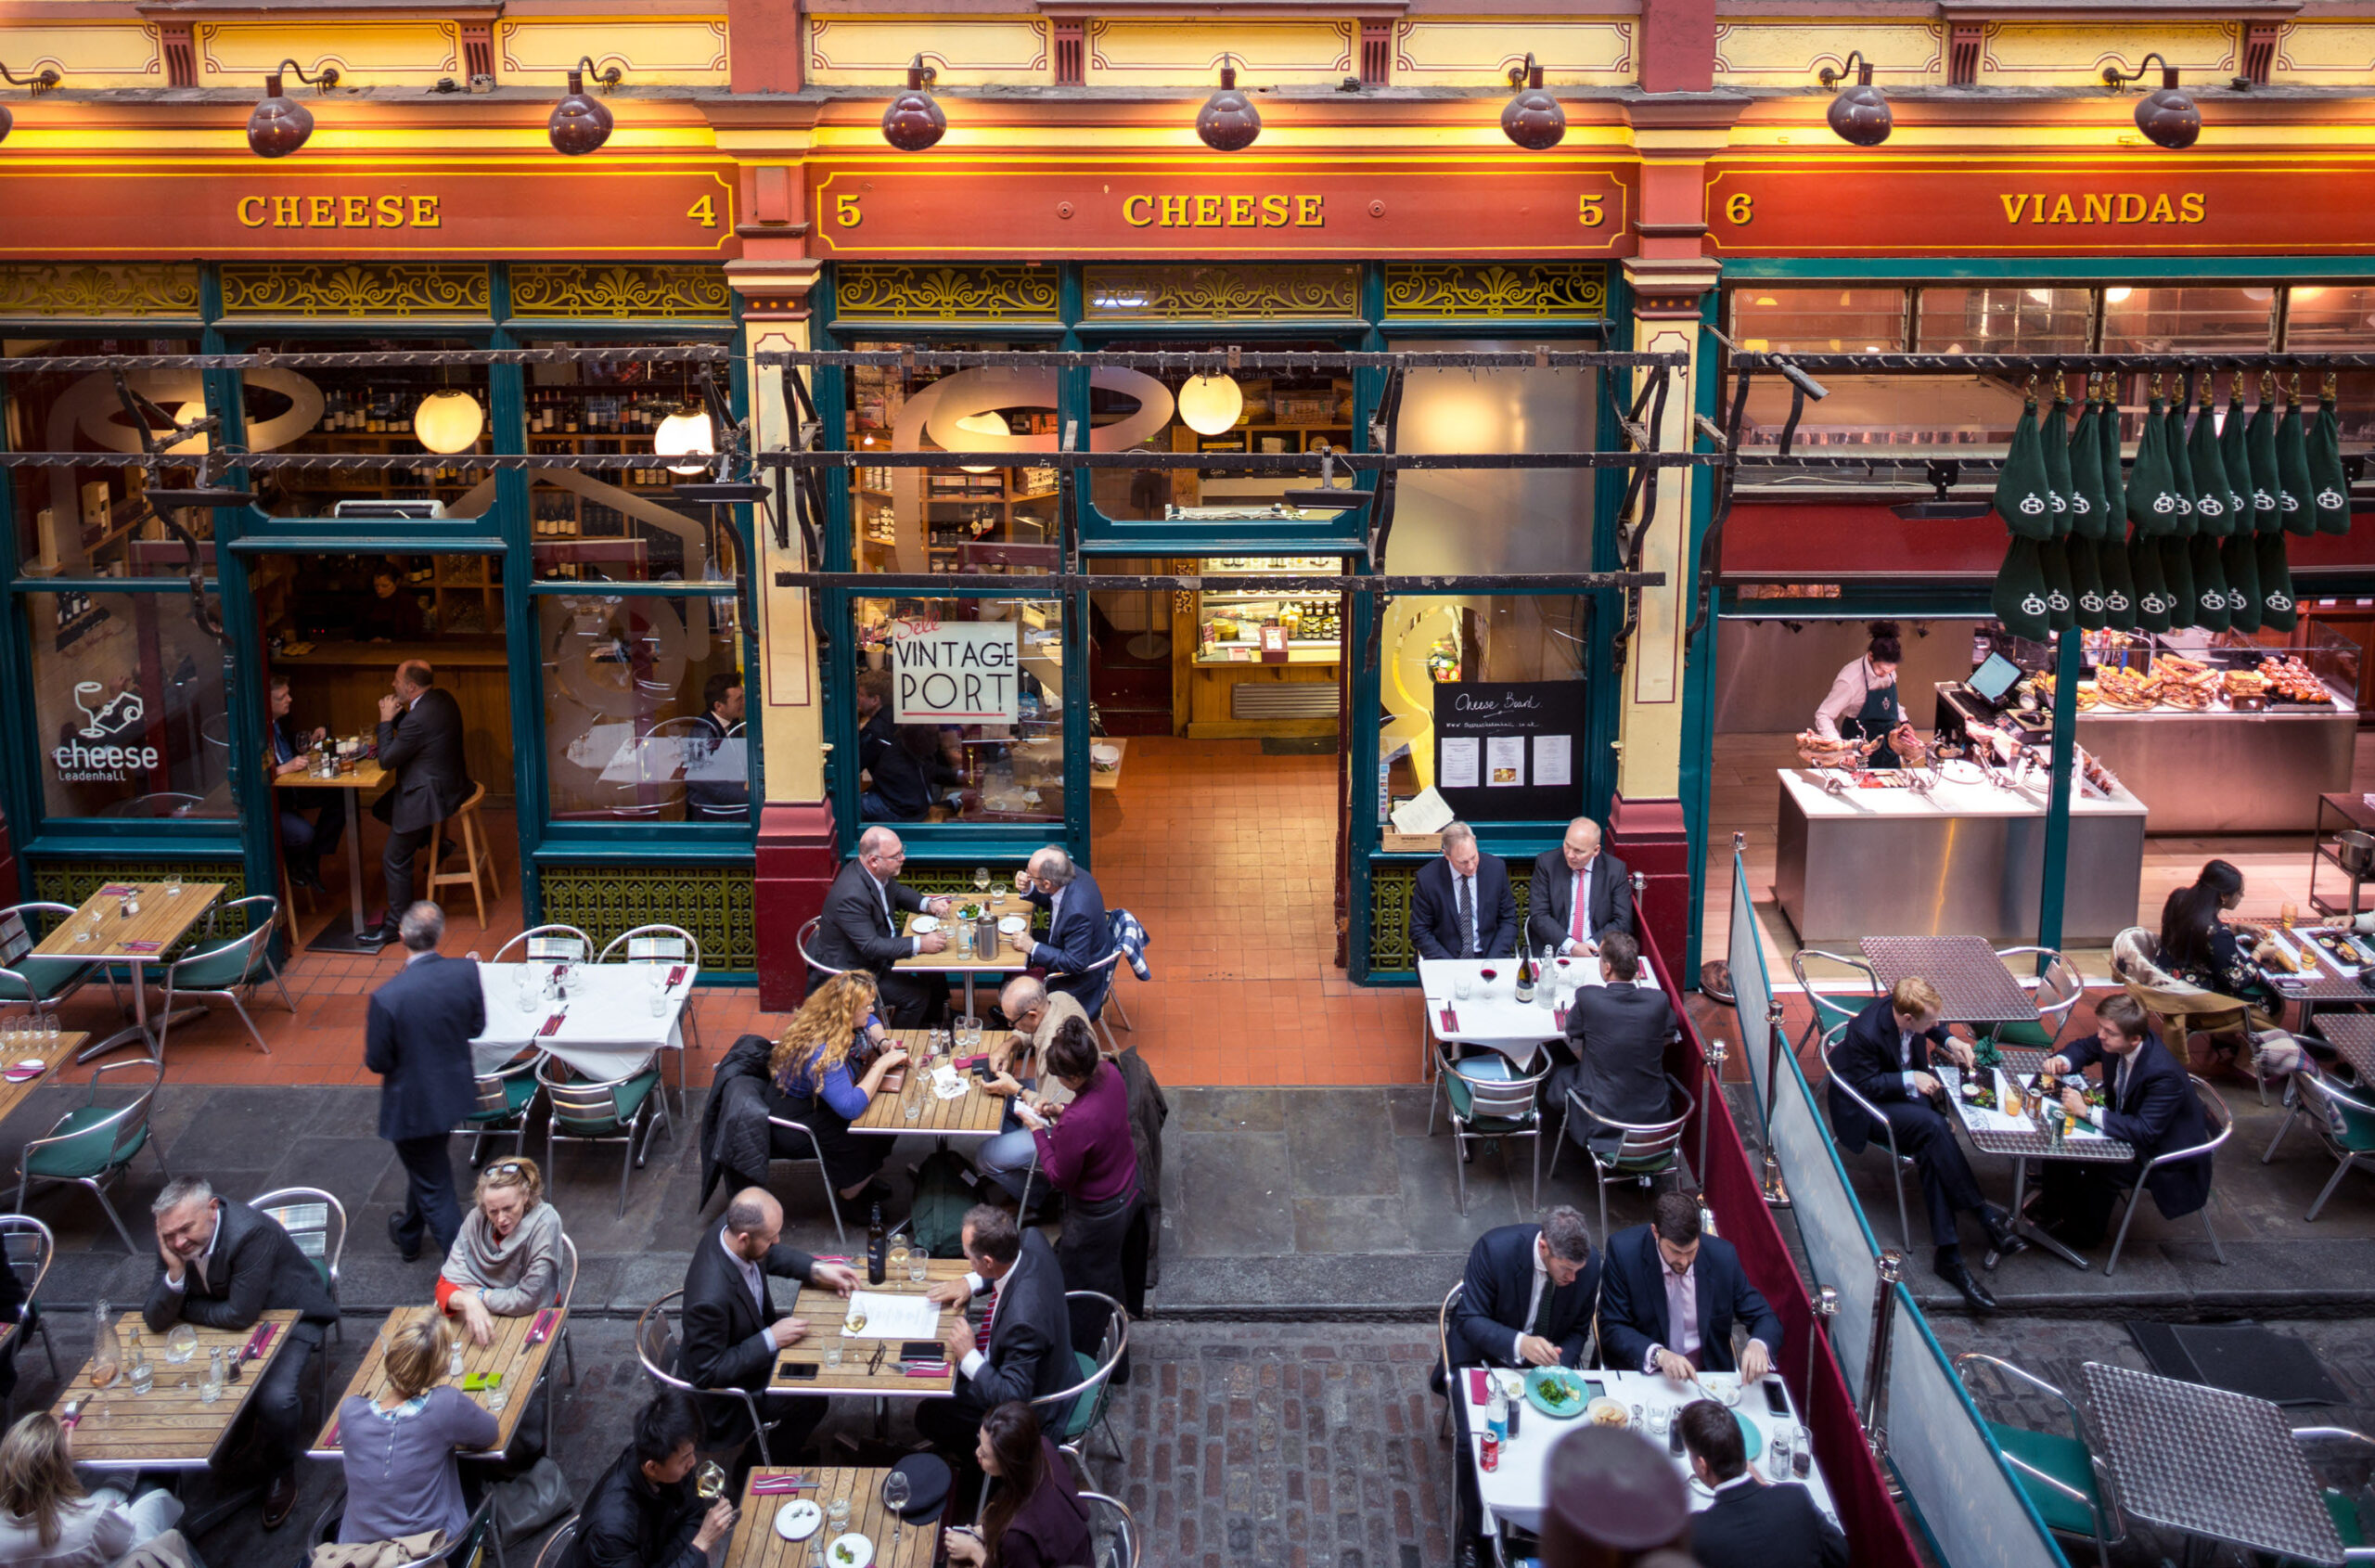 Best Independent Shopping Experiences - Cheese at Leadenhall - people eating at tables in front of the restaurant inside the covered market